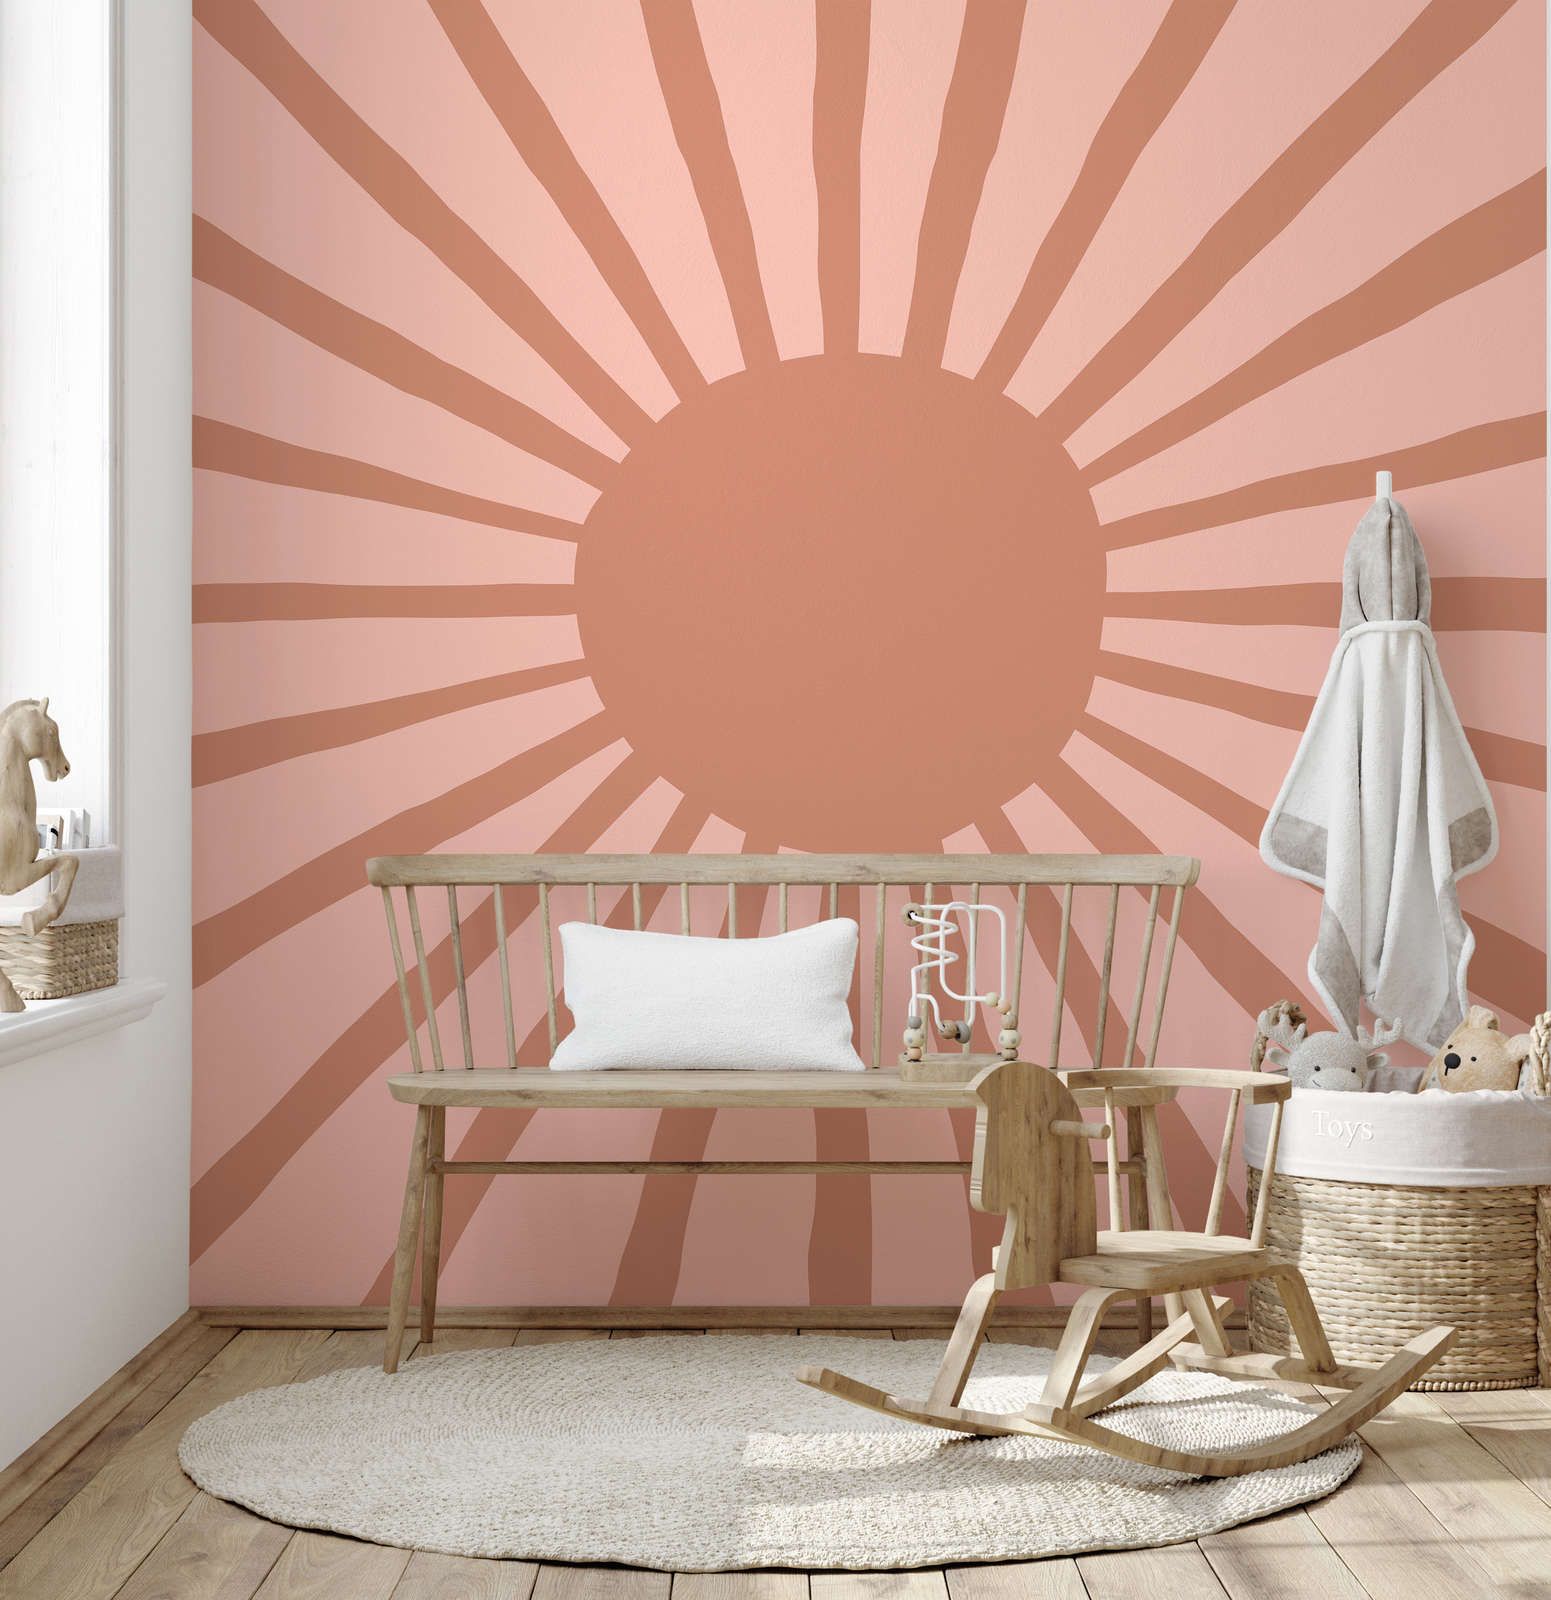         Painted Style Abstract Sun Wallpaper - Smooth & Light Shiny Non-woven
    